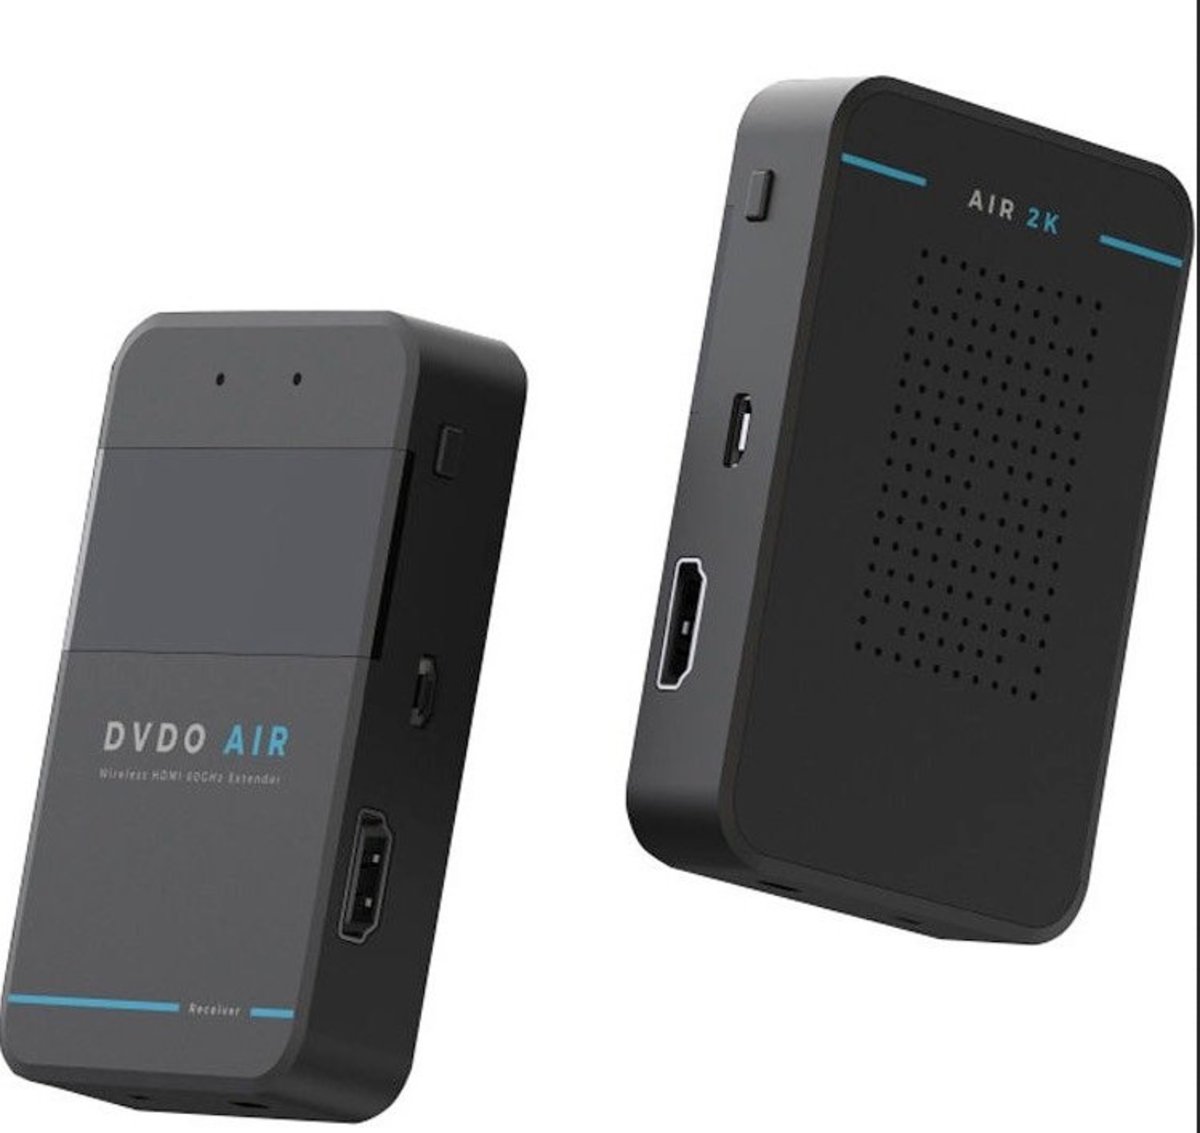 DVDO's Air 2K Wireless Transmission Kit Just Works When It Comes To 1080p High Definition Video